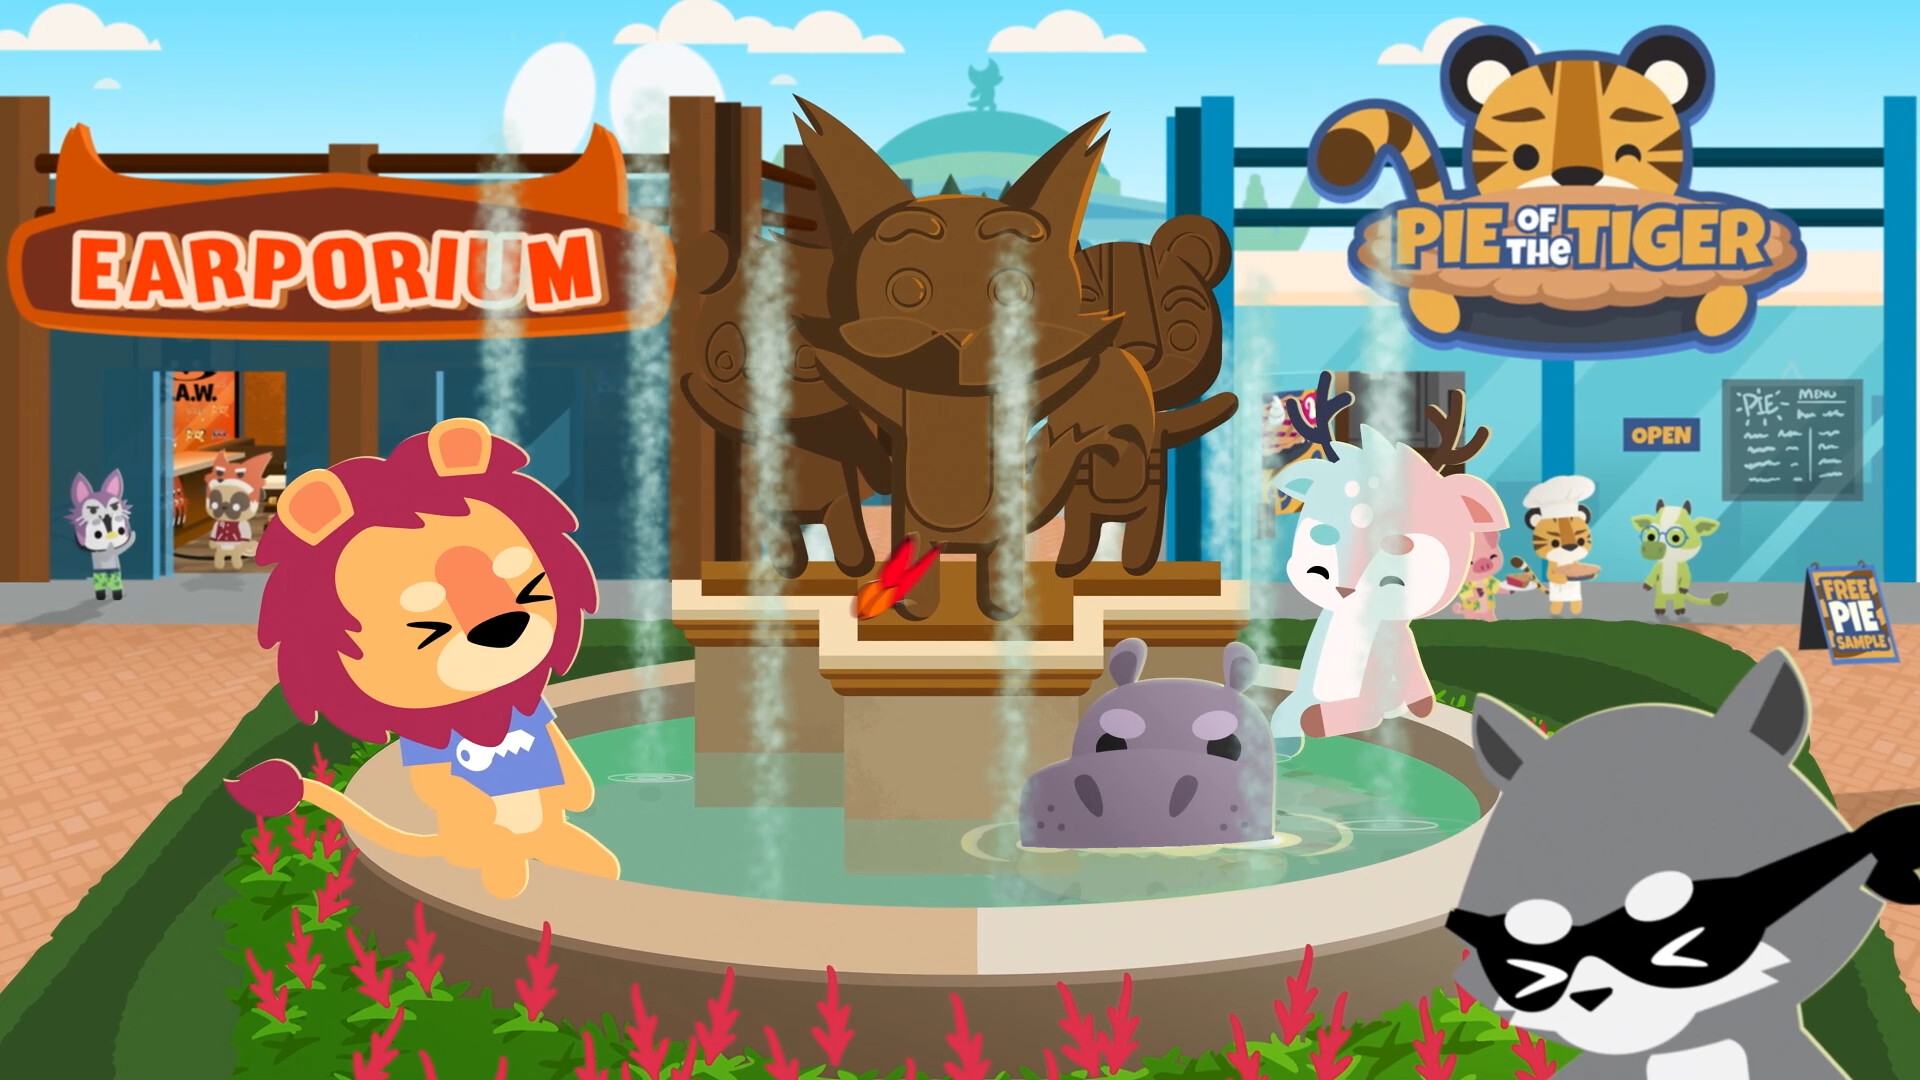 Super Animal Royale brings bonkers action to PS4 and PS5 later this year